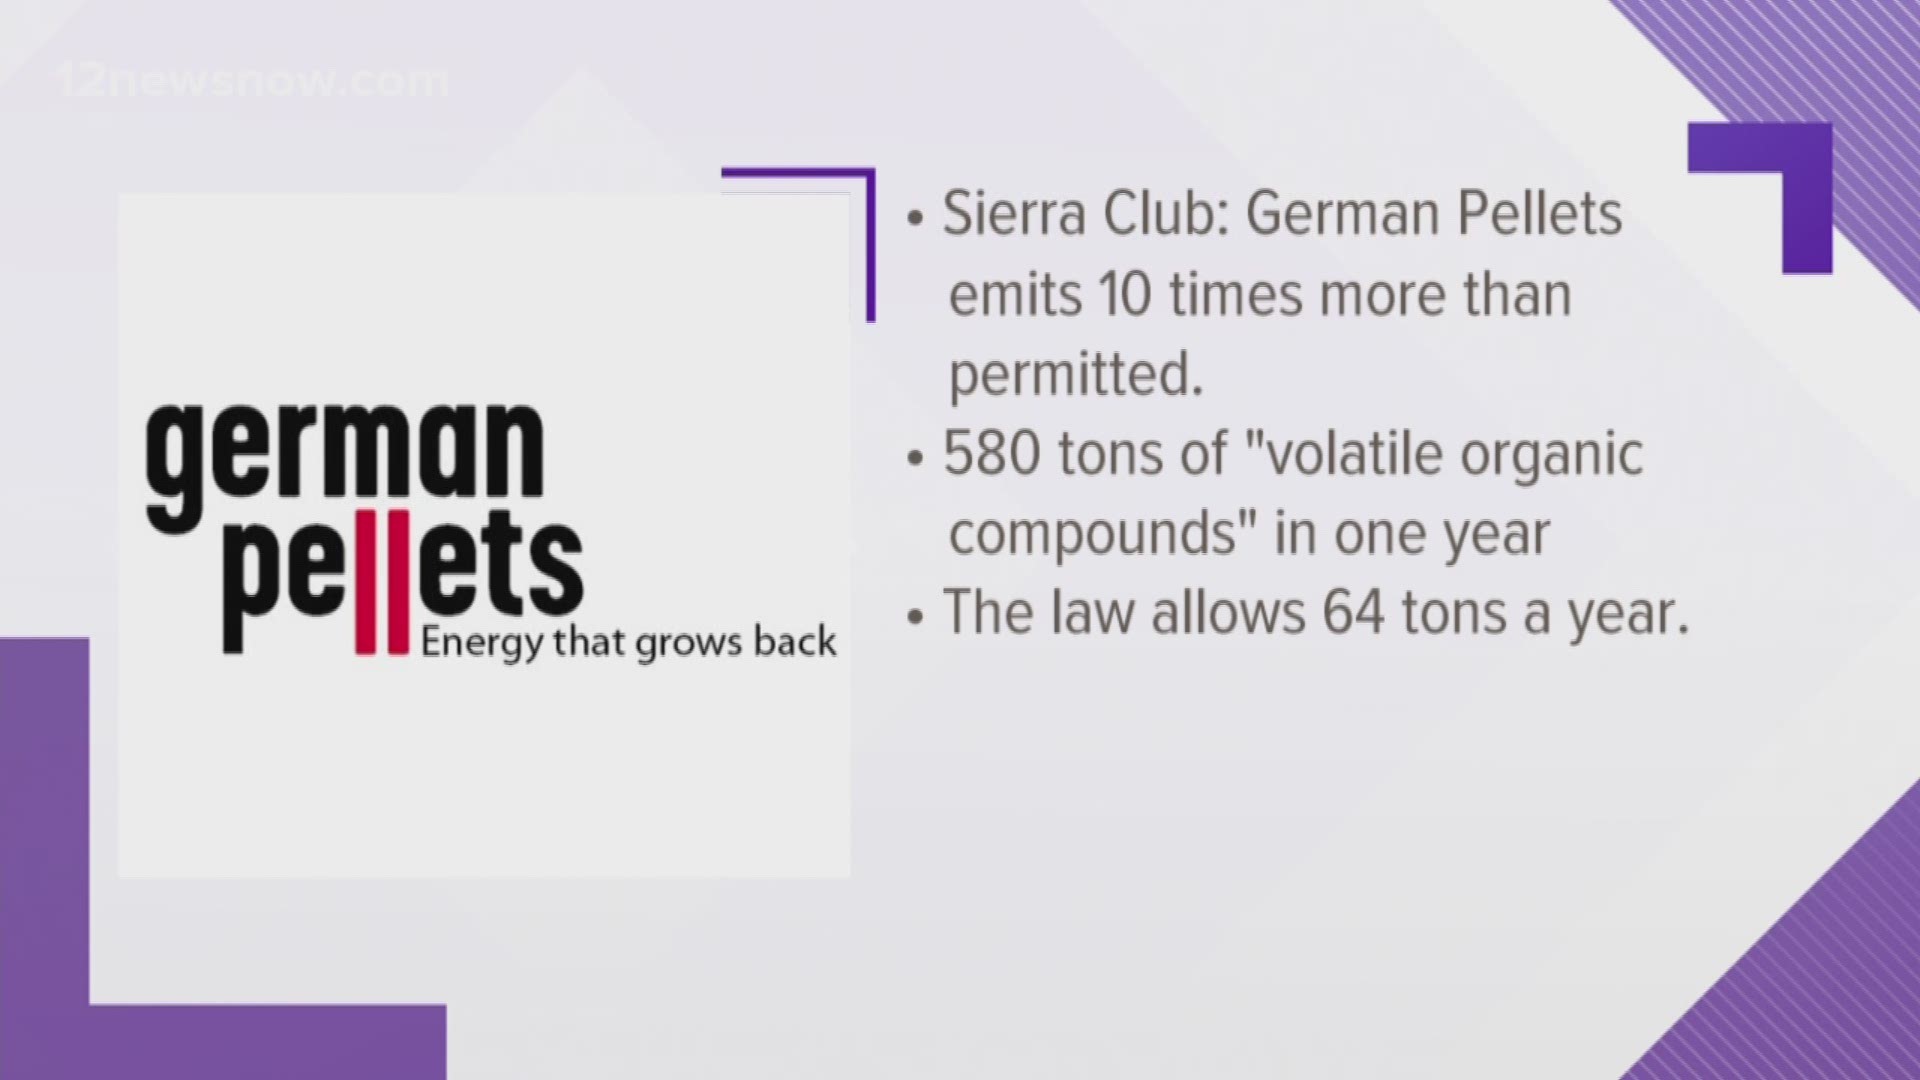 A report by the Sierra Club says that German Pellets emitted tons more air pollution than legally allowed